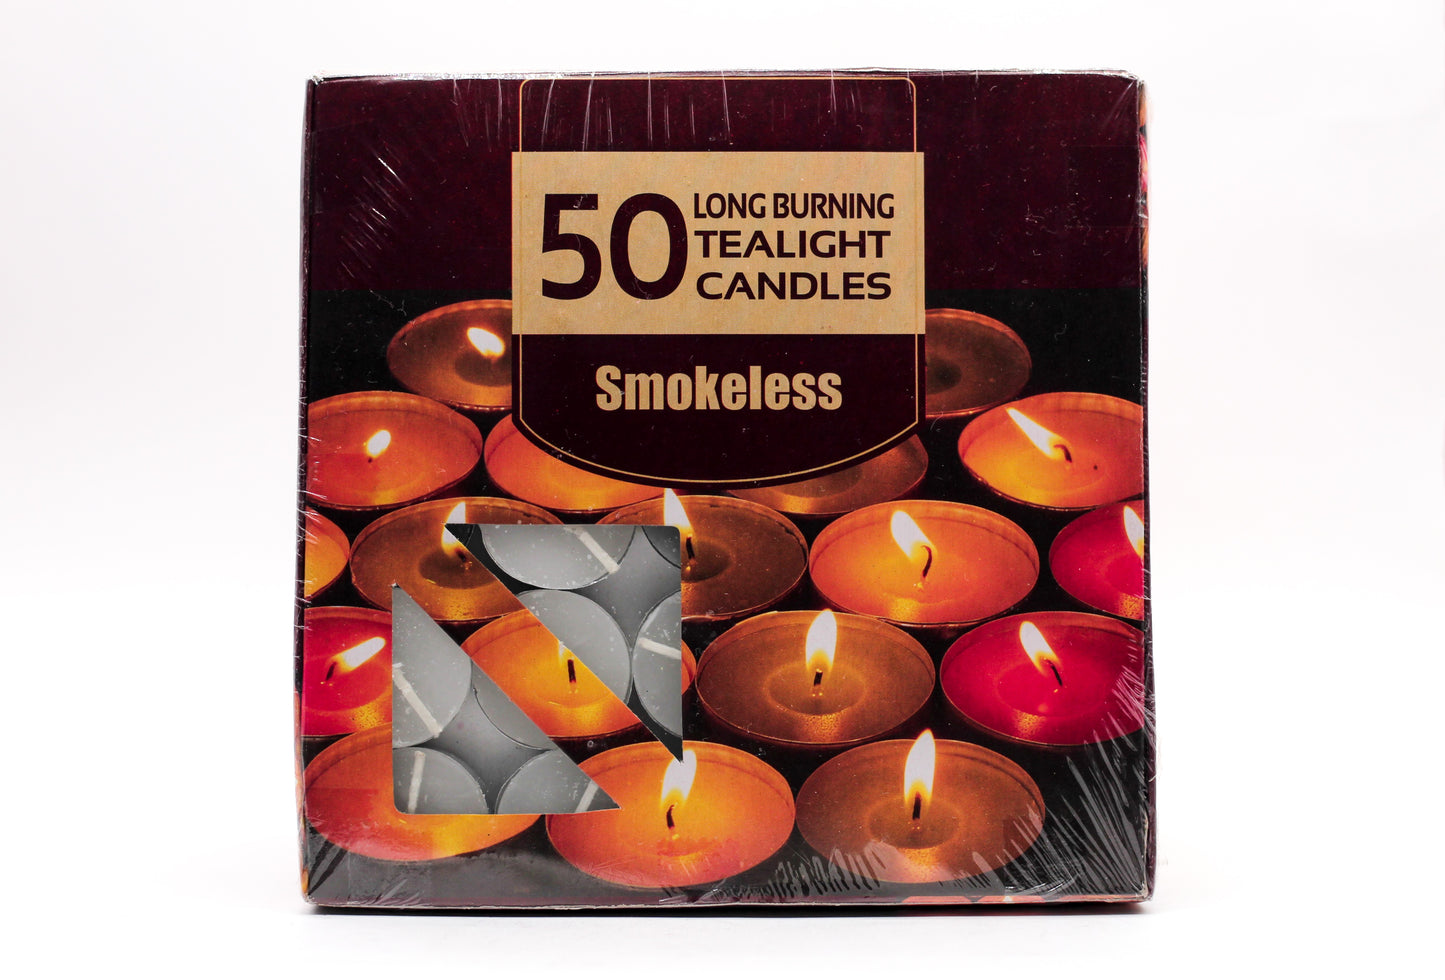 AuraDecor Pack of 50 Smokeless Tealight Candle (Burning Time 1.5 hours approx)